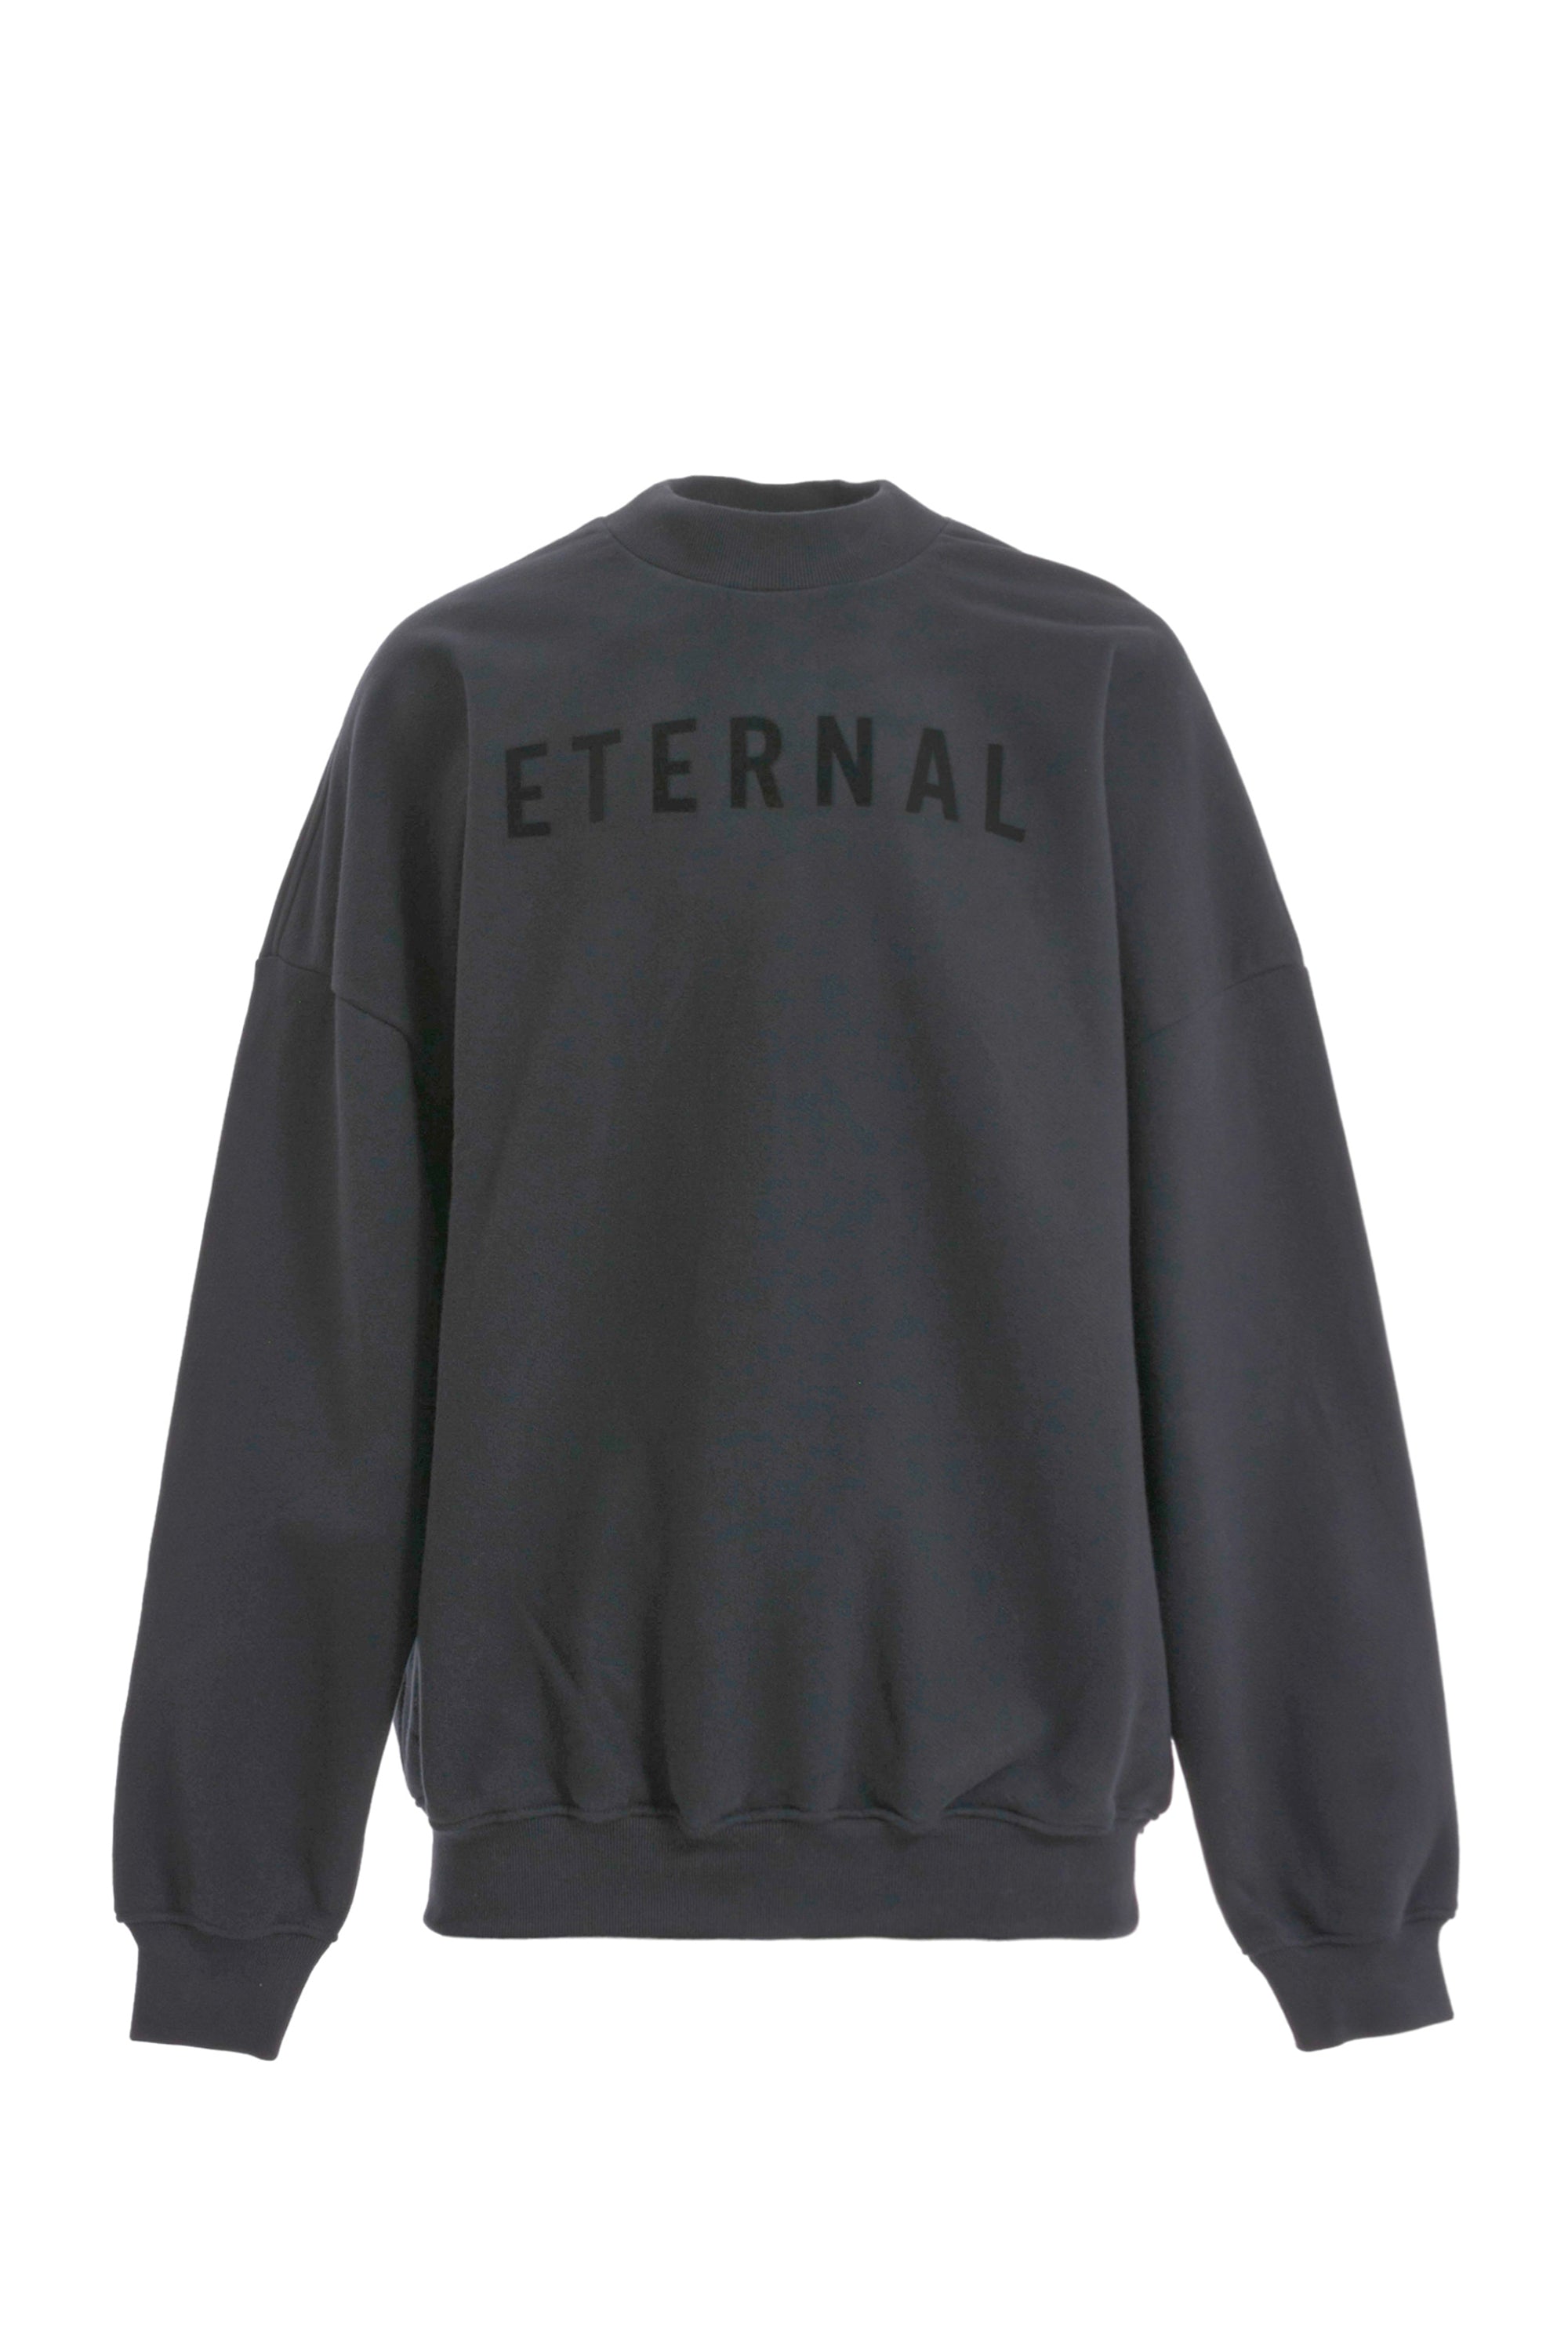 FEAR OF GOD THE ETERNAL COLLECTION フィアオブゴッド ...